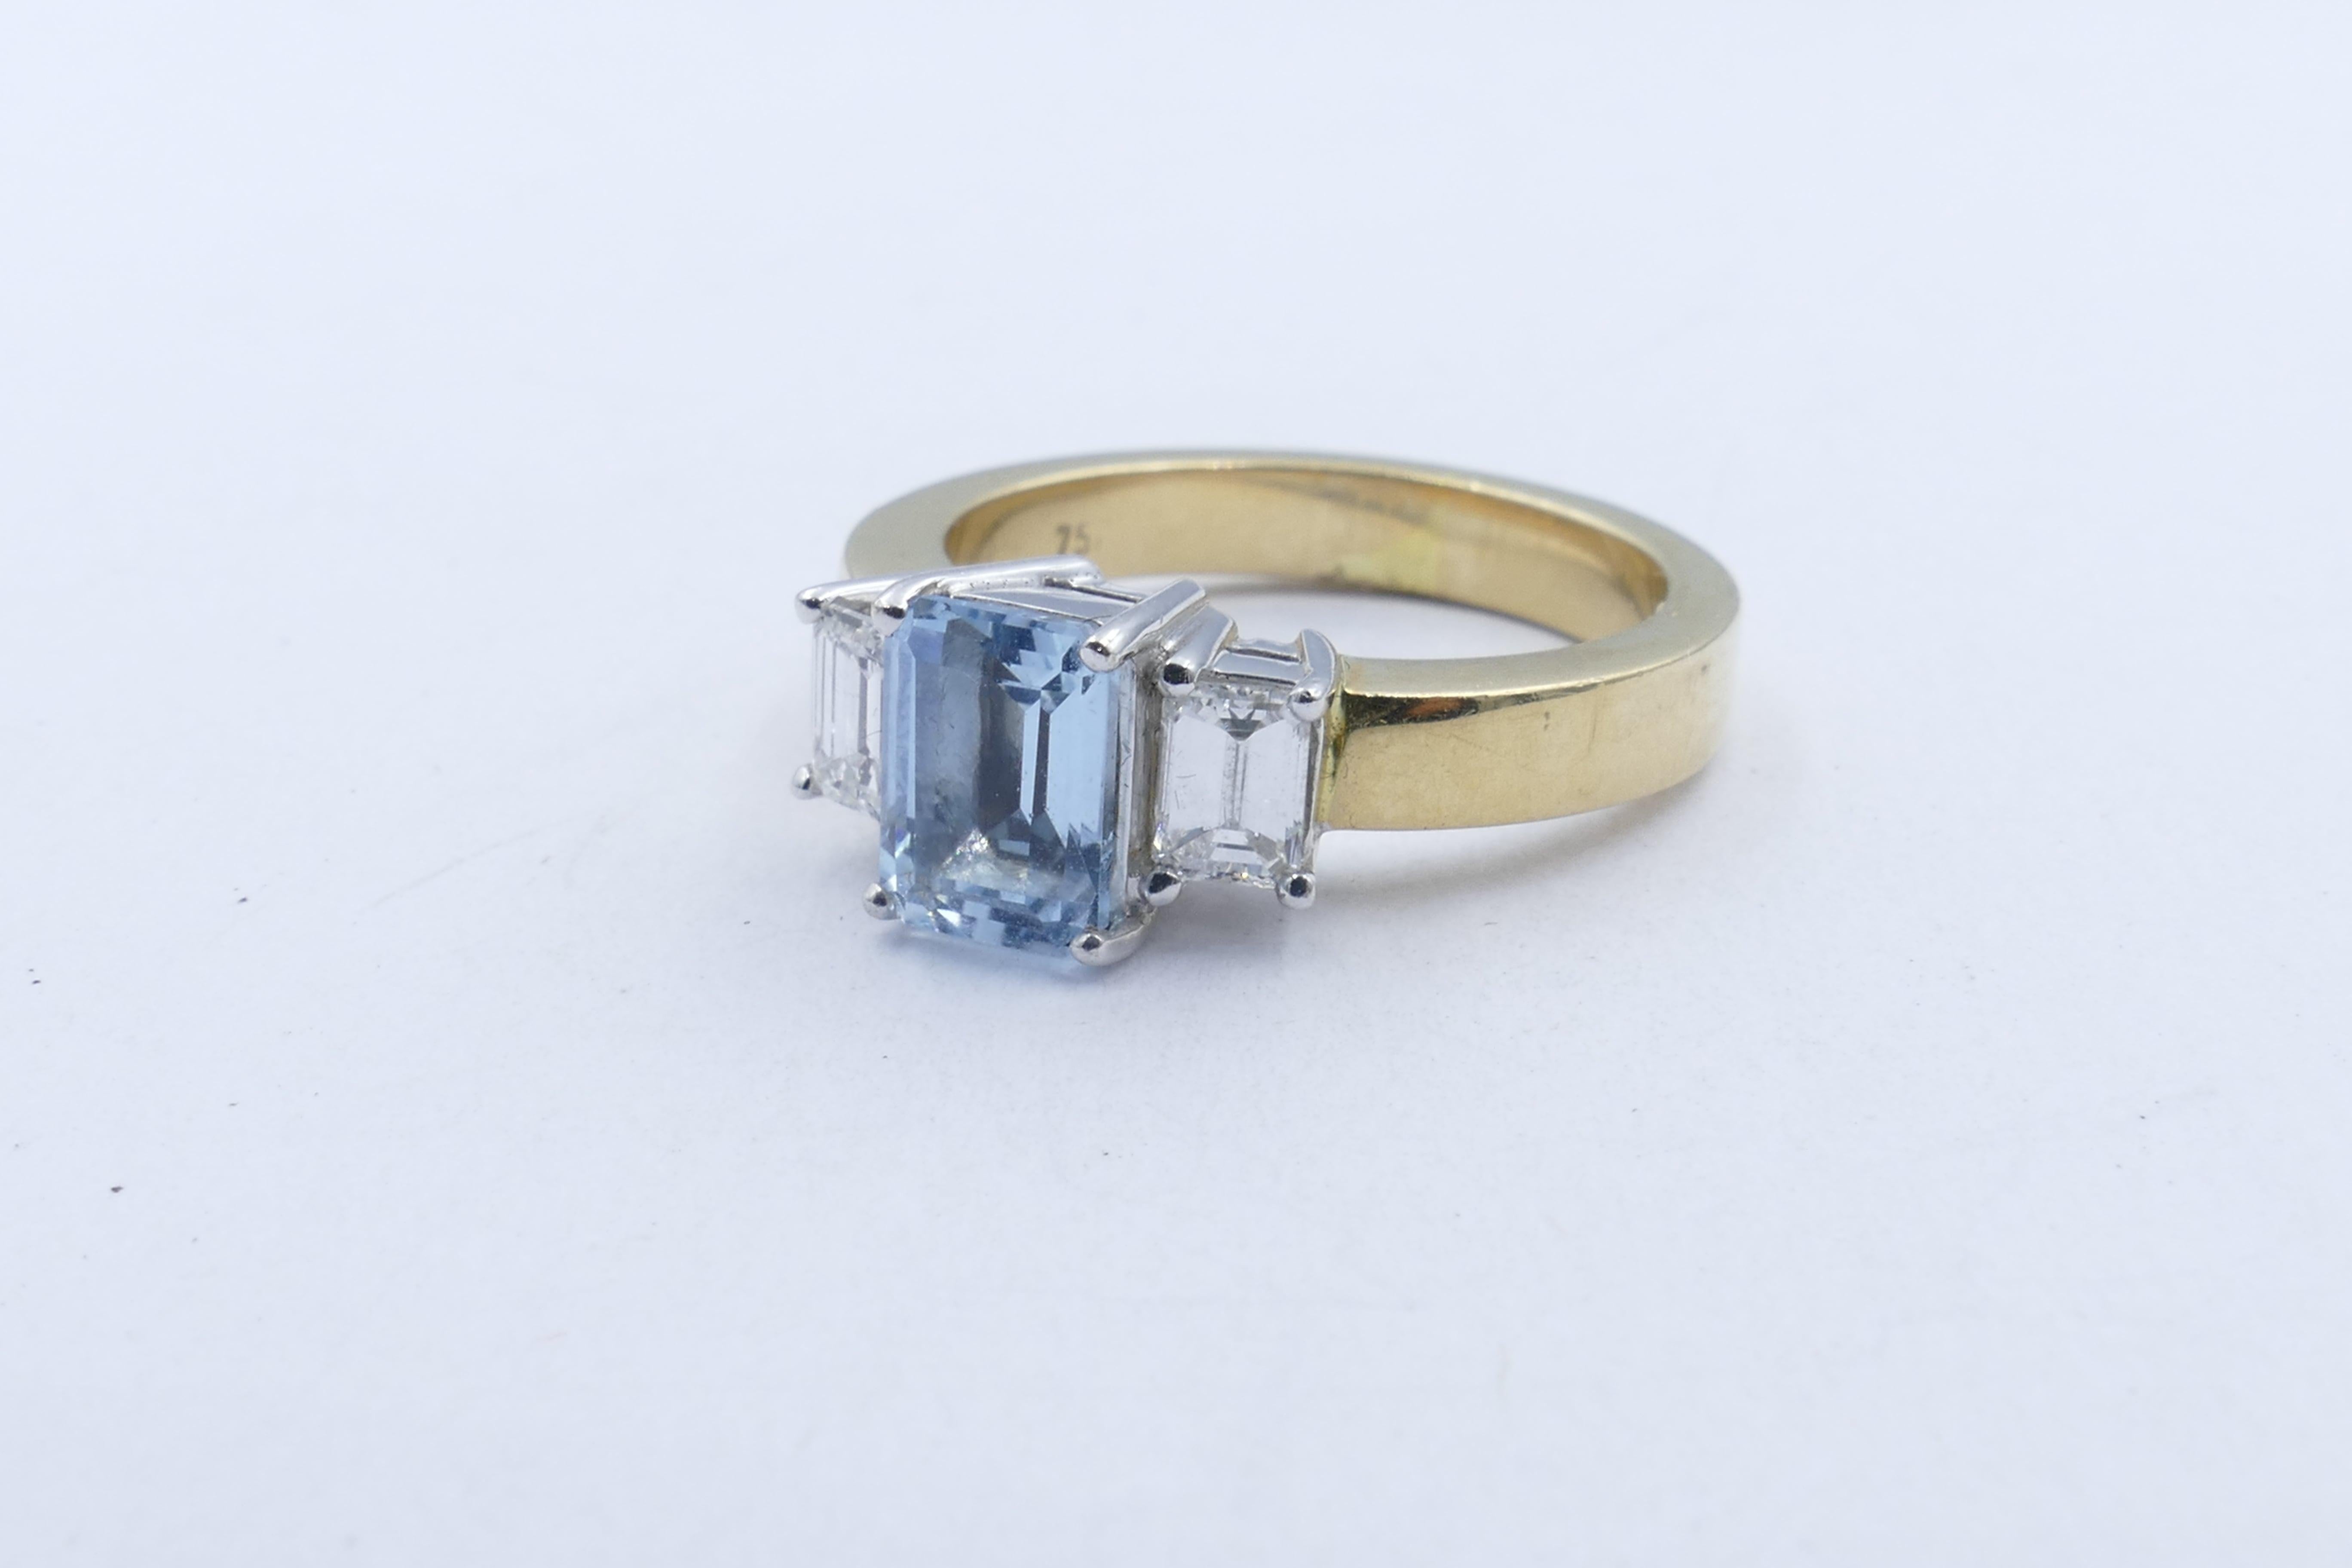 In gorgeous Art Deco Style this very attractive Ring has an Emerald Cut Aquamarine measuring 7.05 X 5.15, 4 claw set, approximately 1 carat, as the centrepiece. The Stone is very pure, eye-clean & vivid blue in colour. 
It is flanked by 2 Emerald